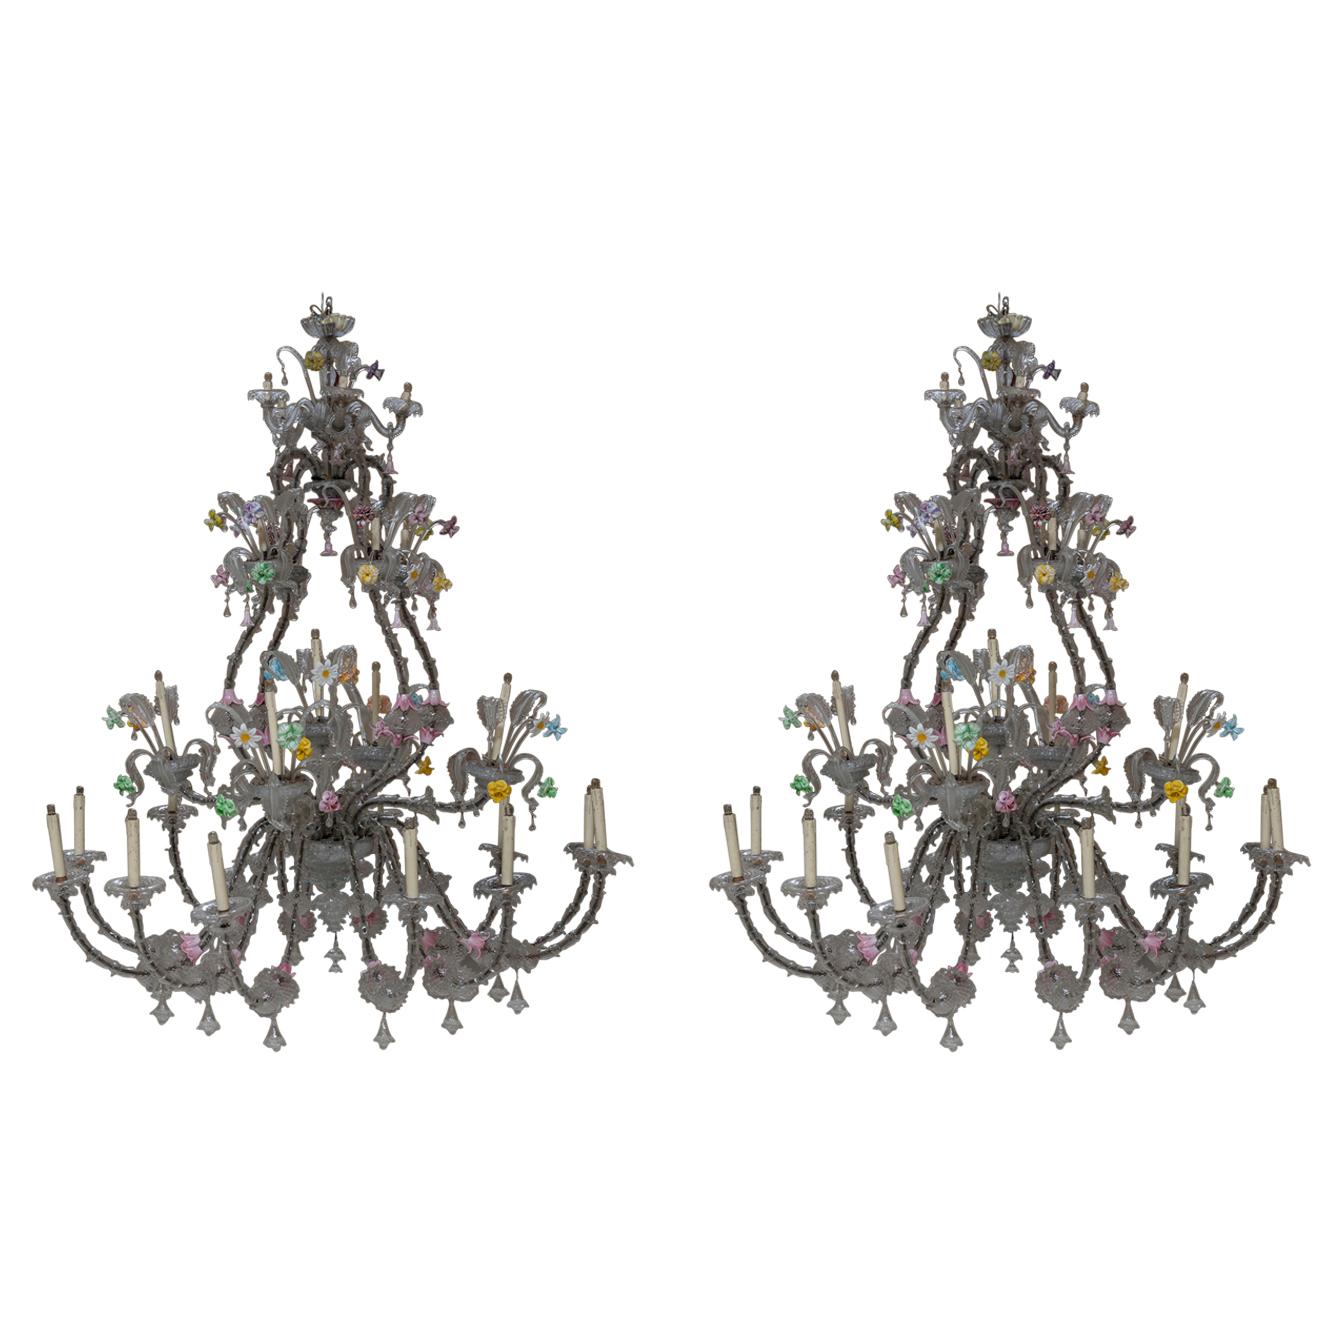 Pair of absolute magnitude and meticulously decorated details chandeliers Ca' Rezzonico by Venini.
The dimensions of the chandeliers are incredible as the precious decorations and colorful glass flowers. 
Each chandelier has 26 lights.